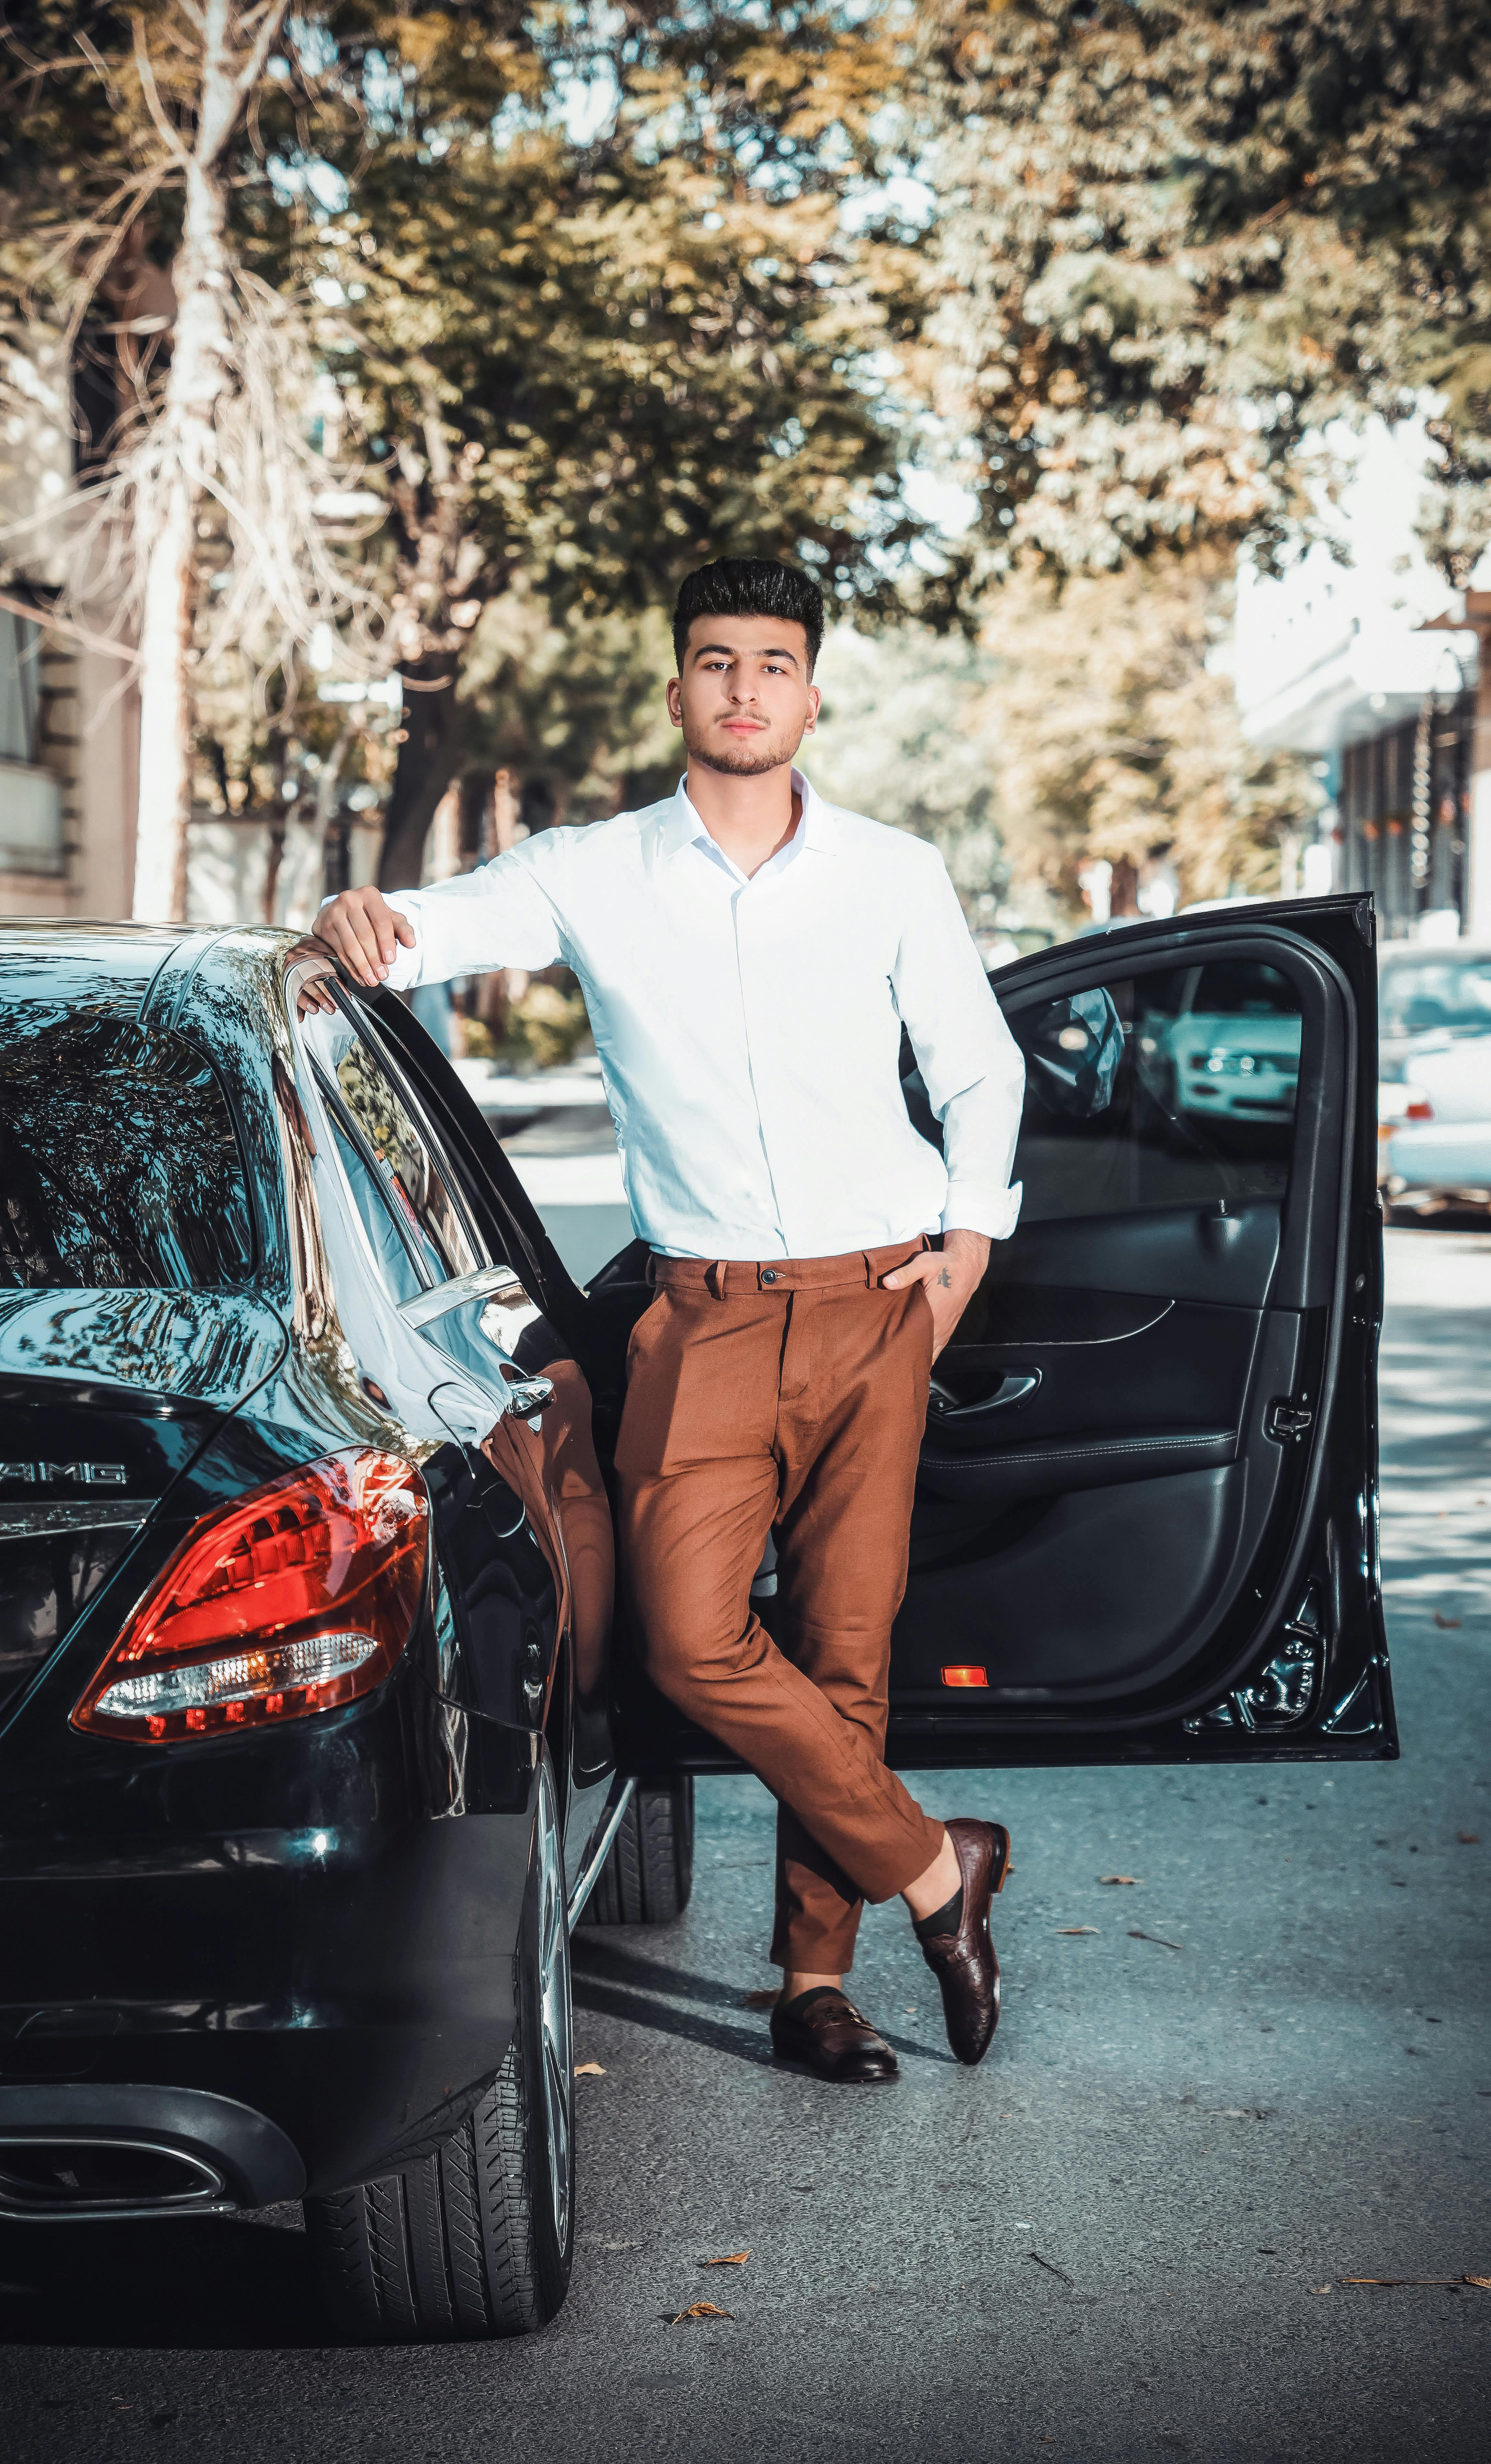 Pose Ideas with Cars for a Stylish Photoshoot